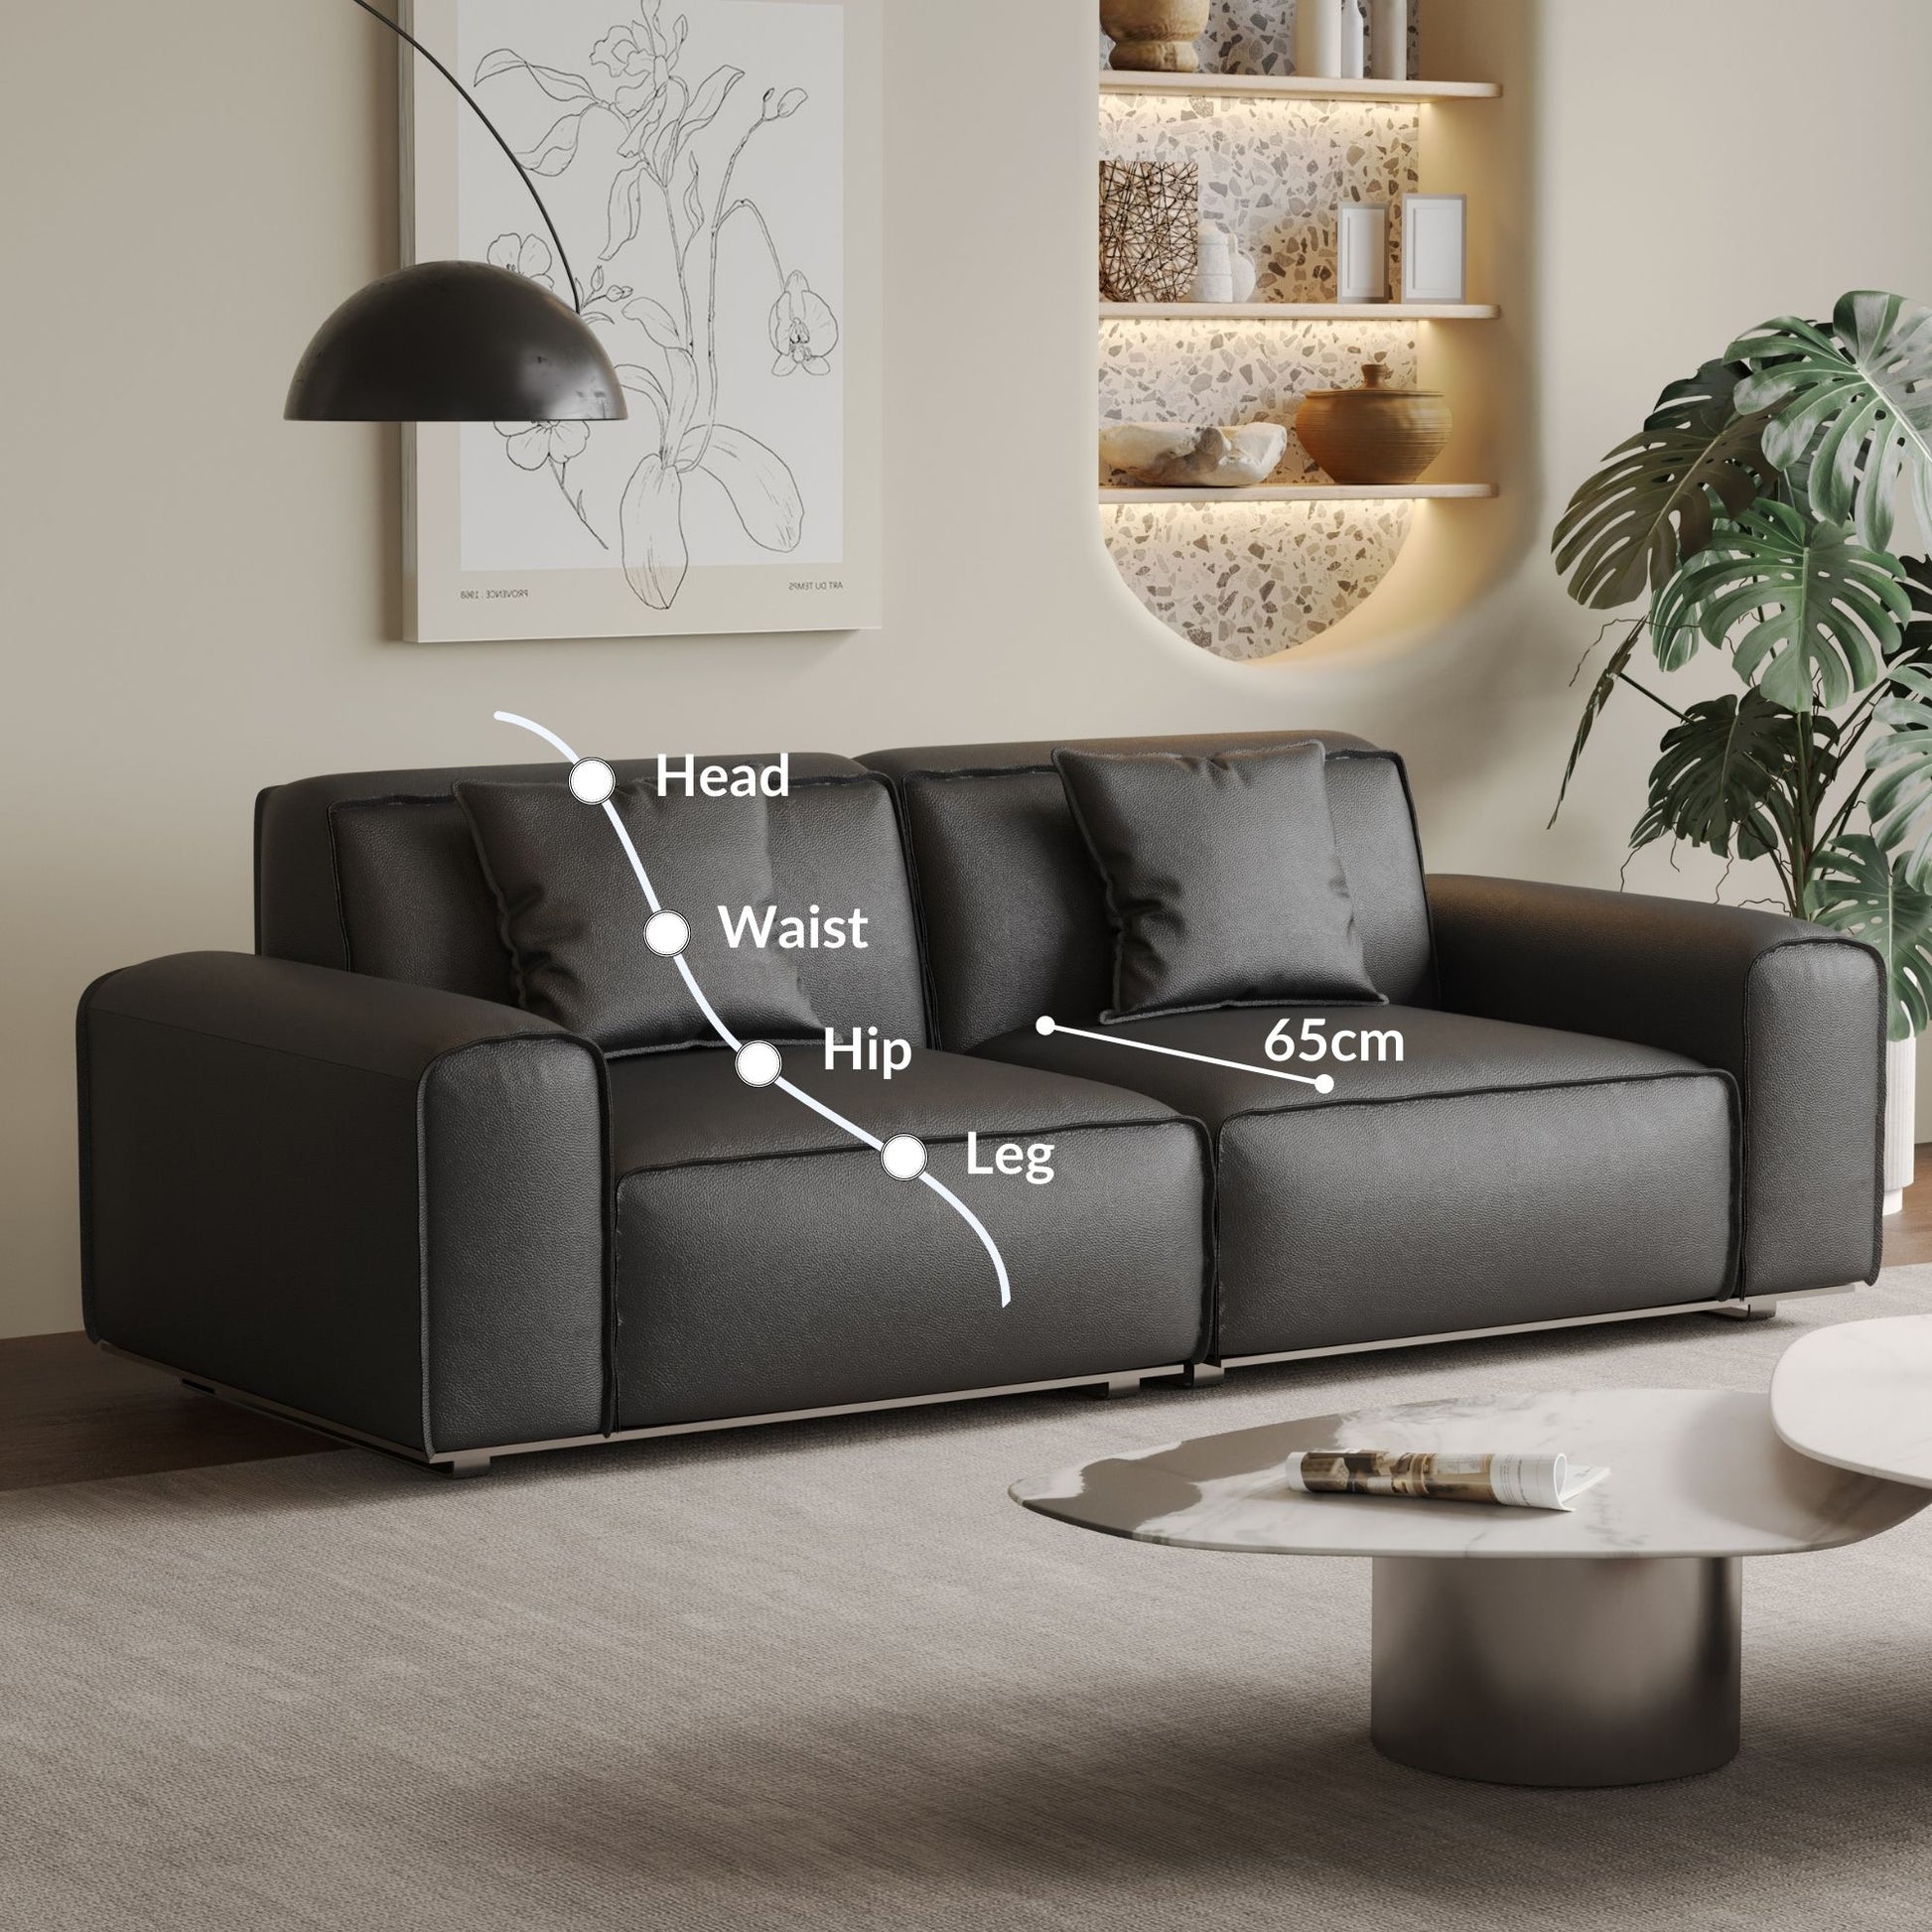 Colby black top grain full leather 2 seat sofa